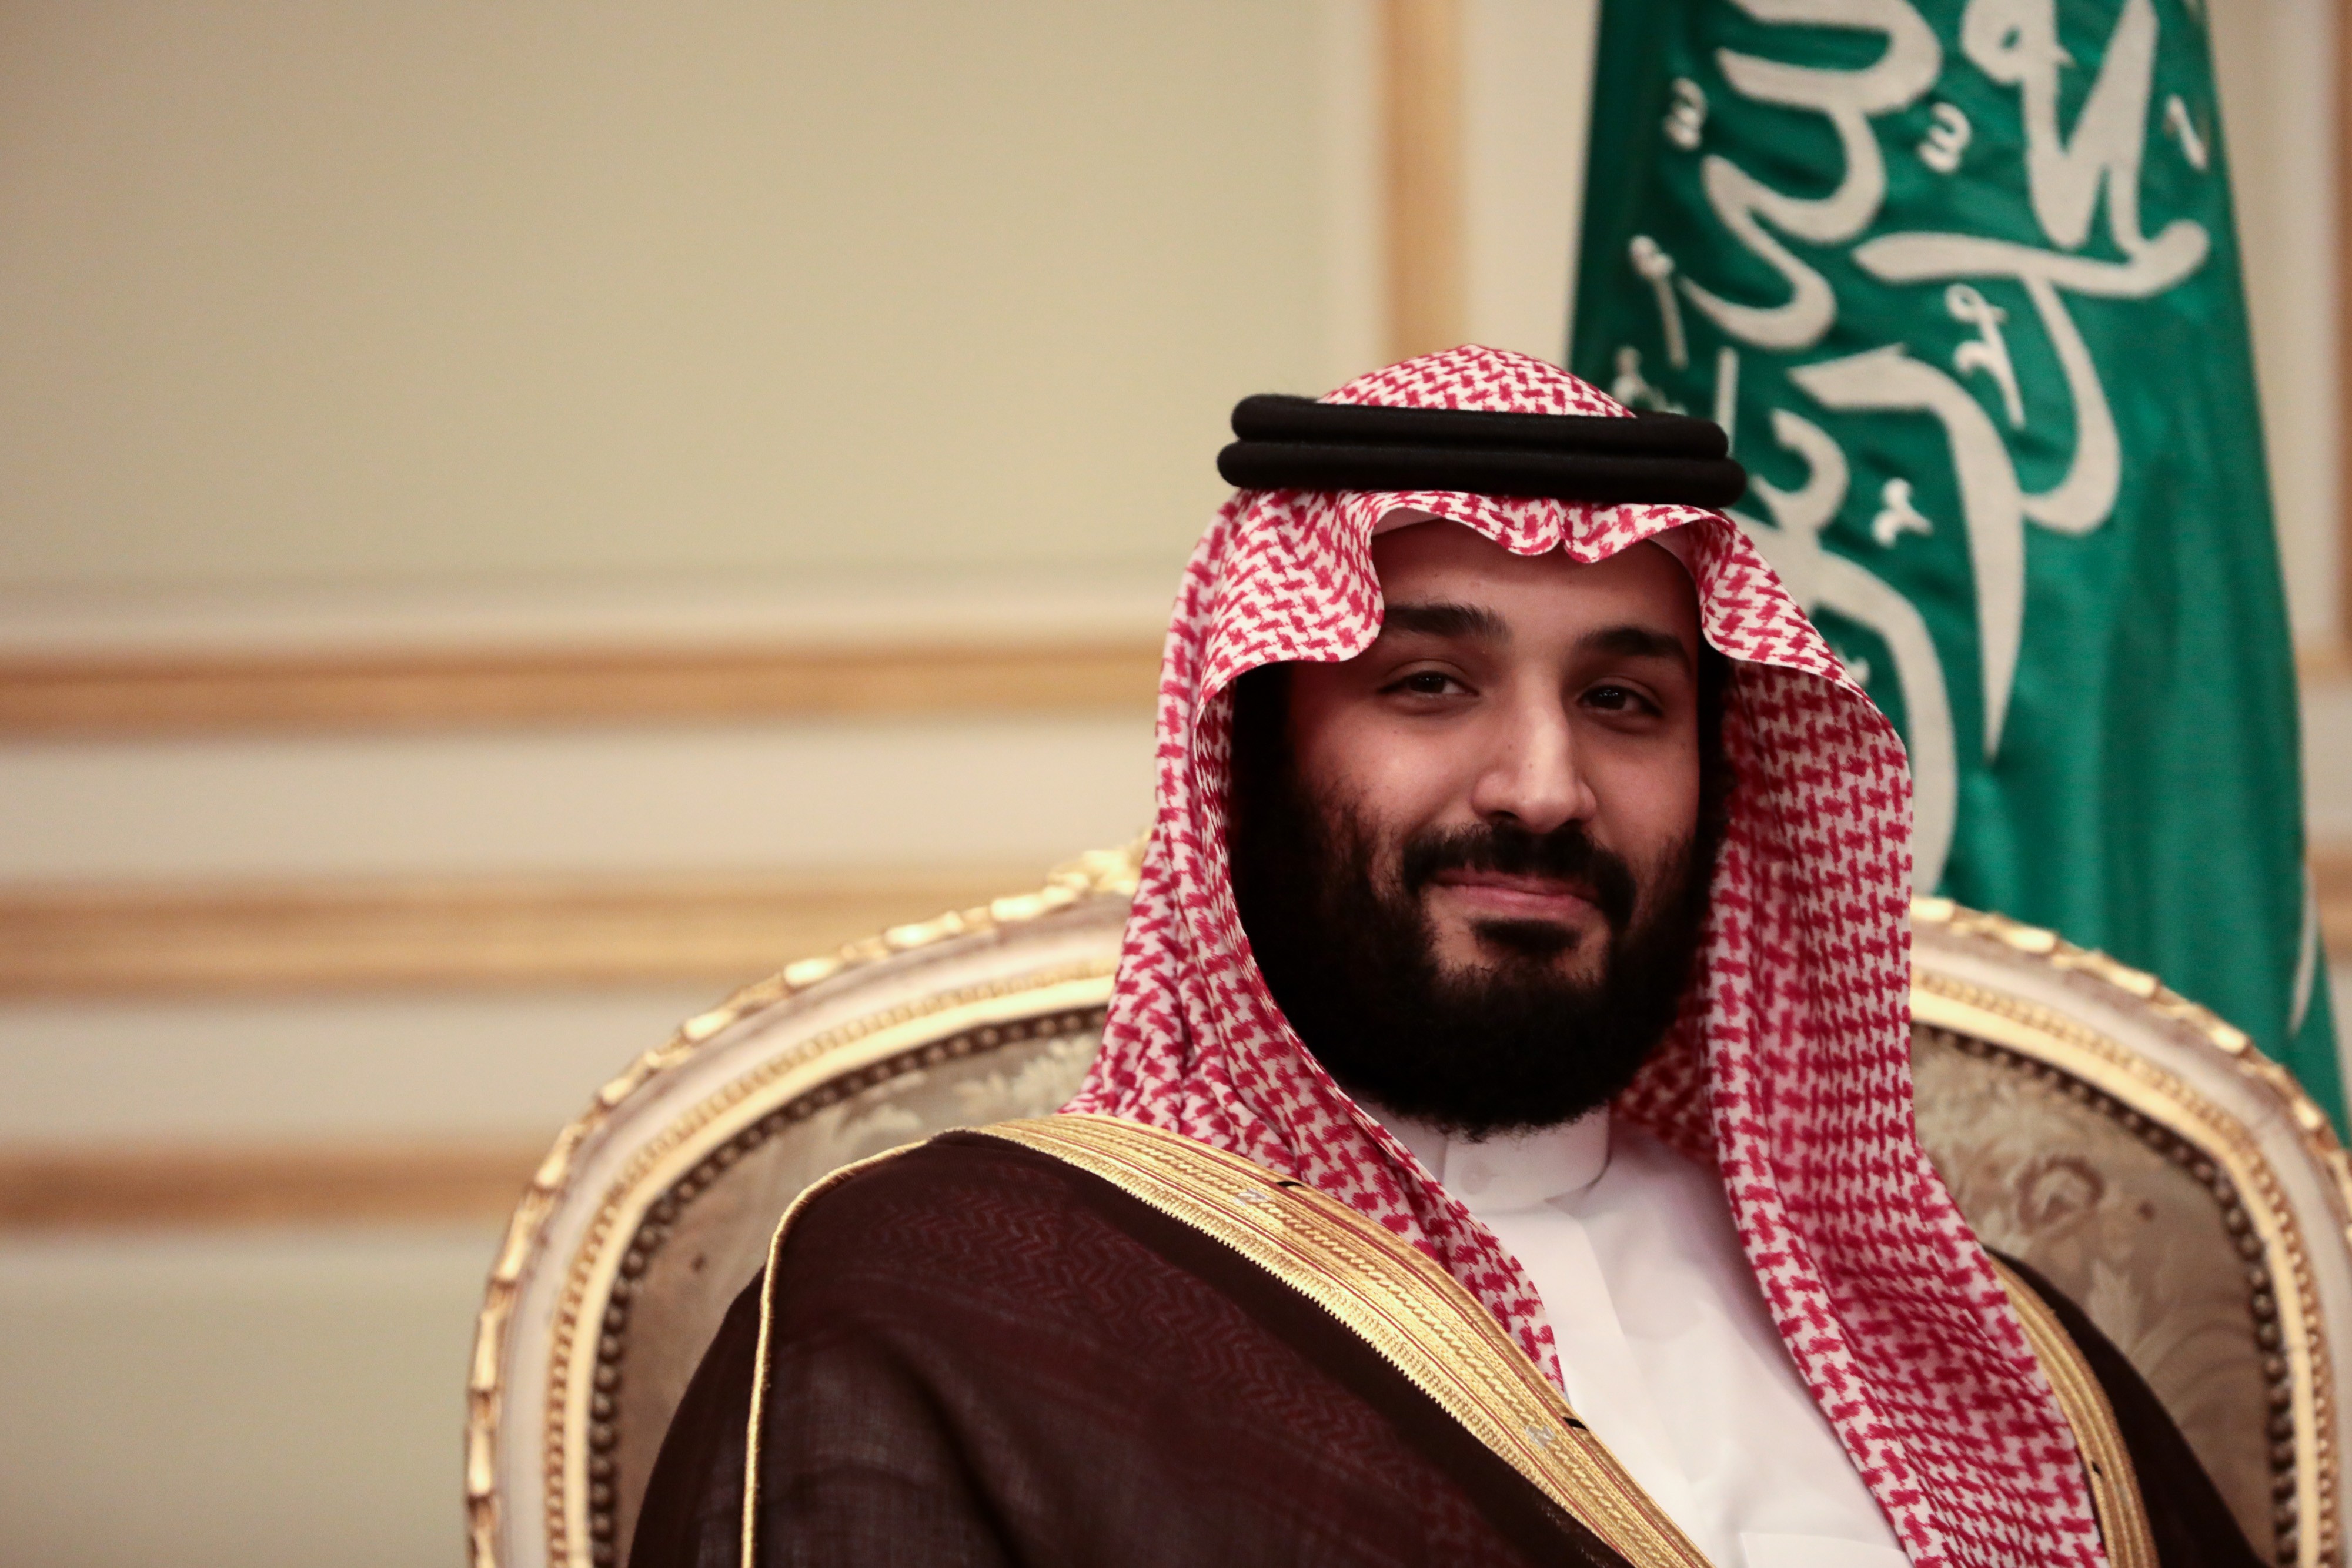 To loyal Saudis, the crown prince is courageously taking on corruption. To sceptics, he’s indulging in a power grab that could inflame tensions. Whoever is right, Saudi Arabia will never be the same